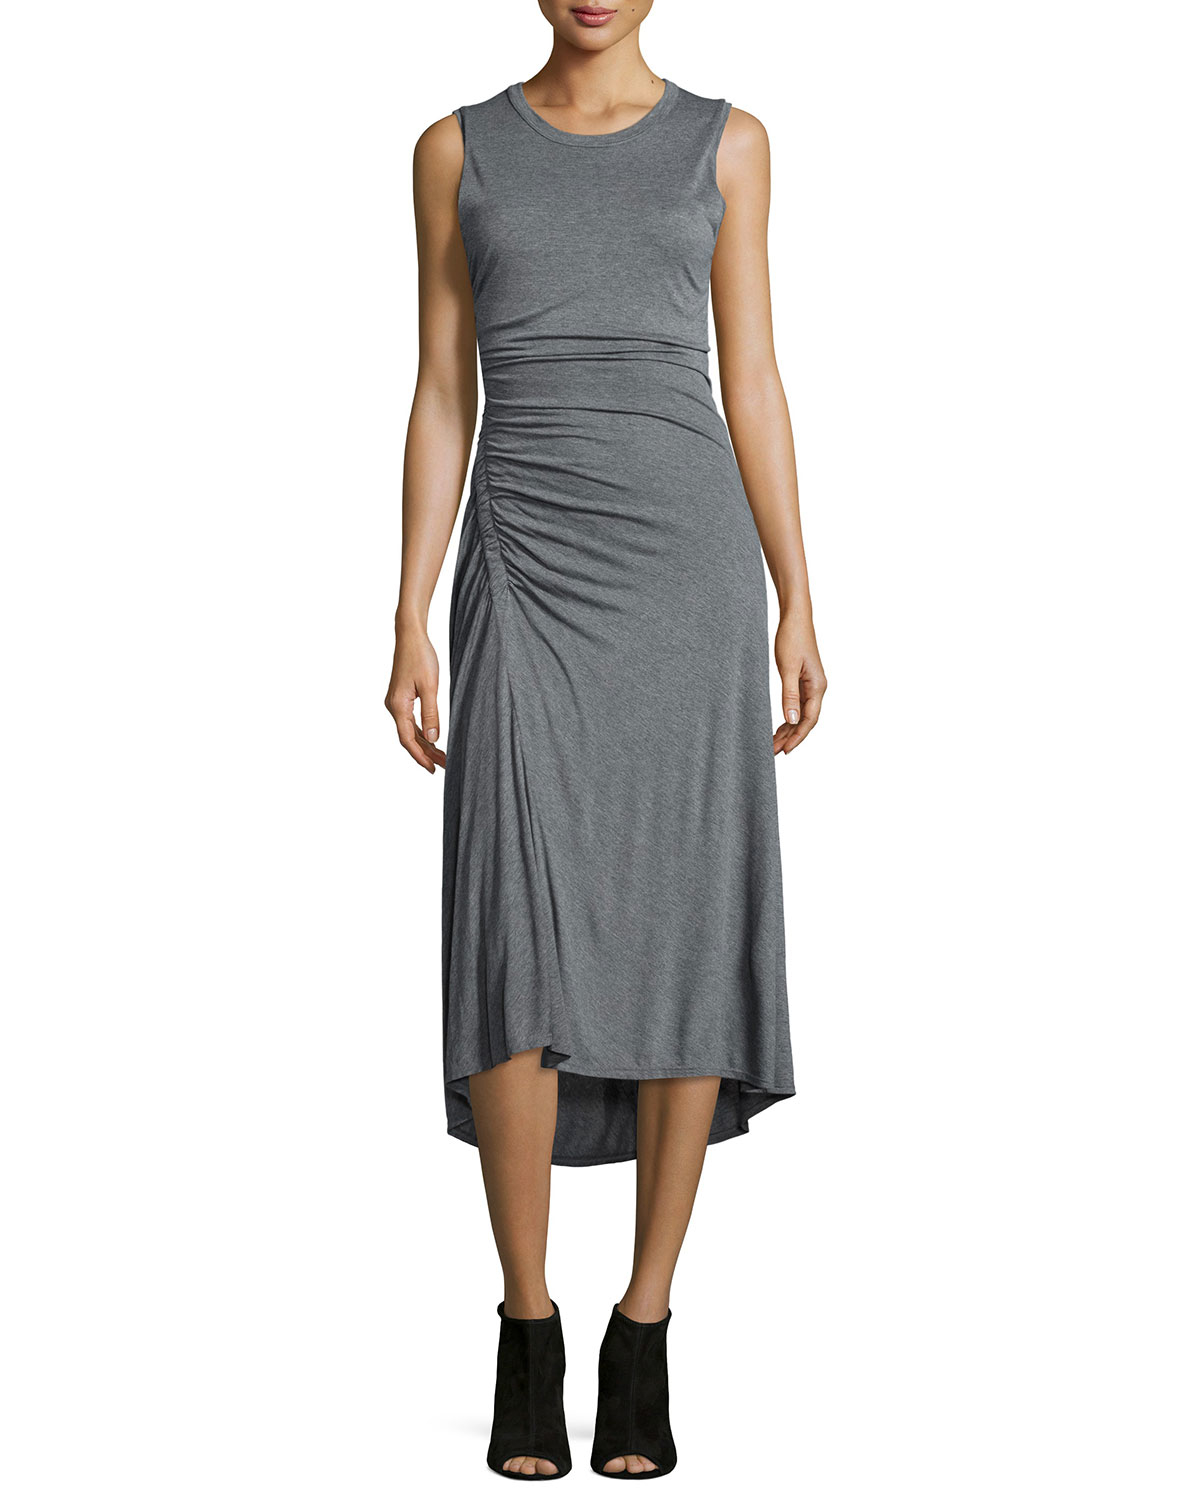 A.L.C. Nicole Ruched Sleeveless Dress in Gray - Lyst